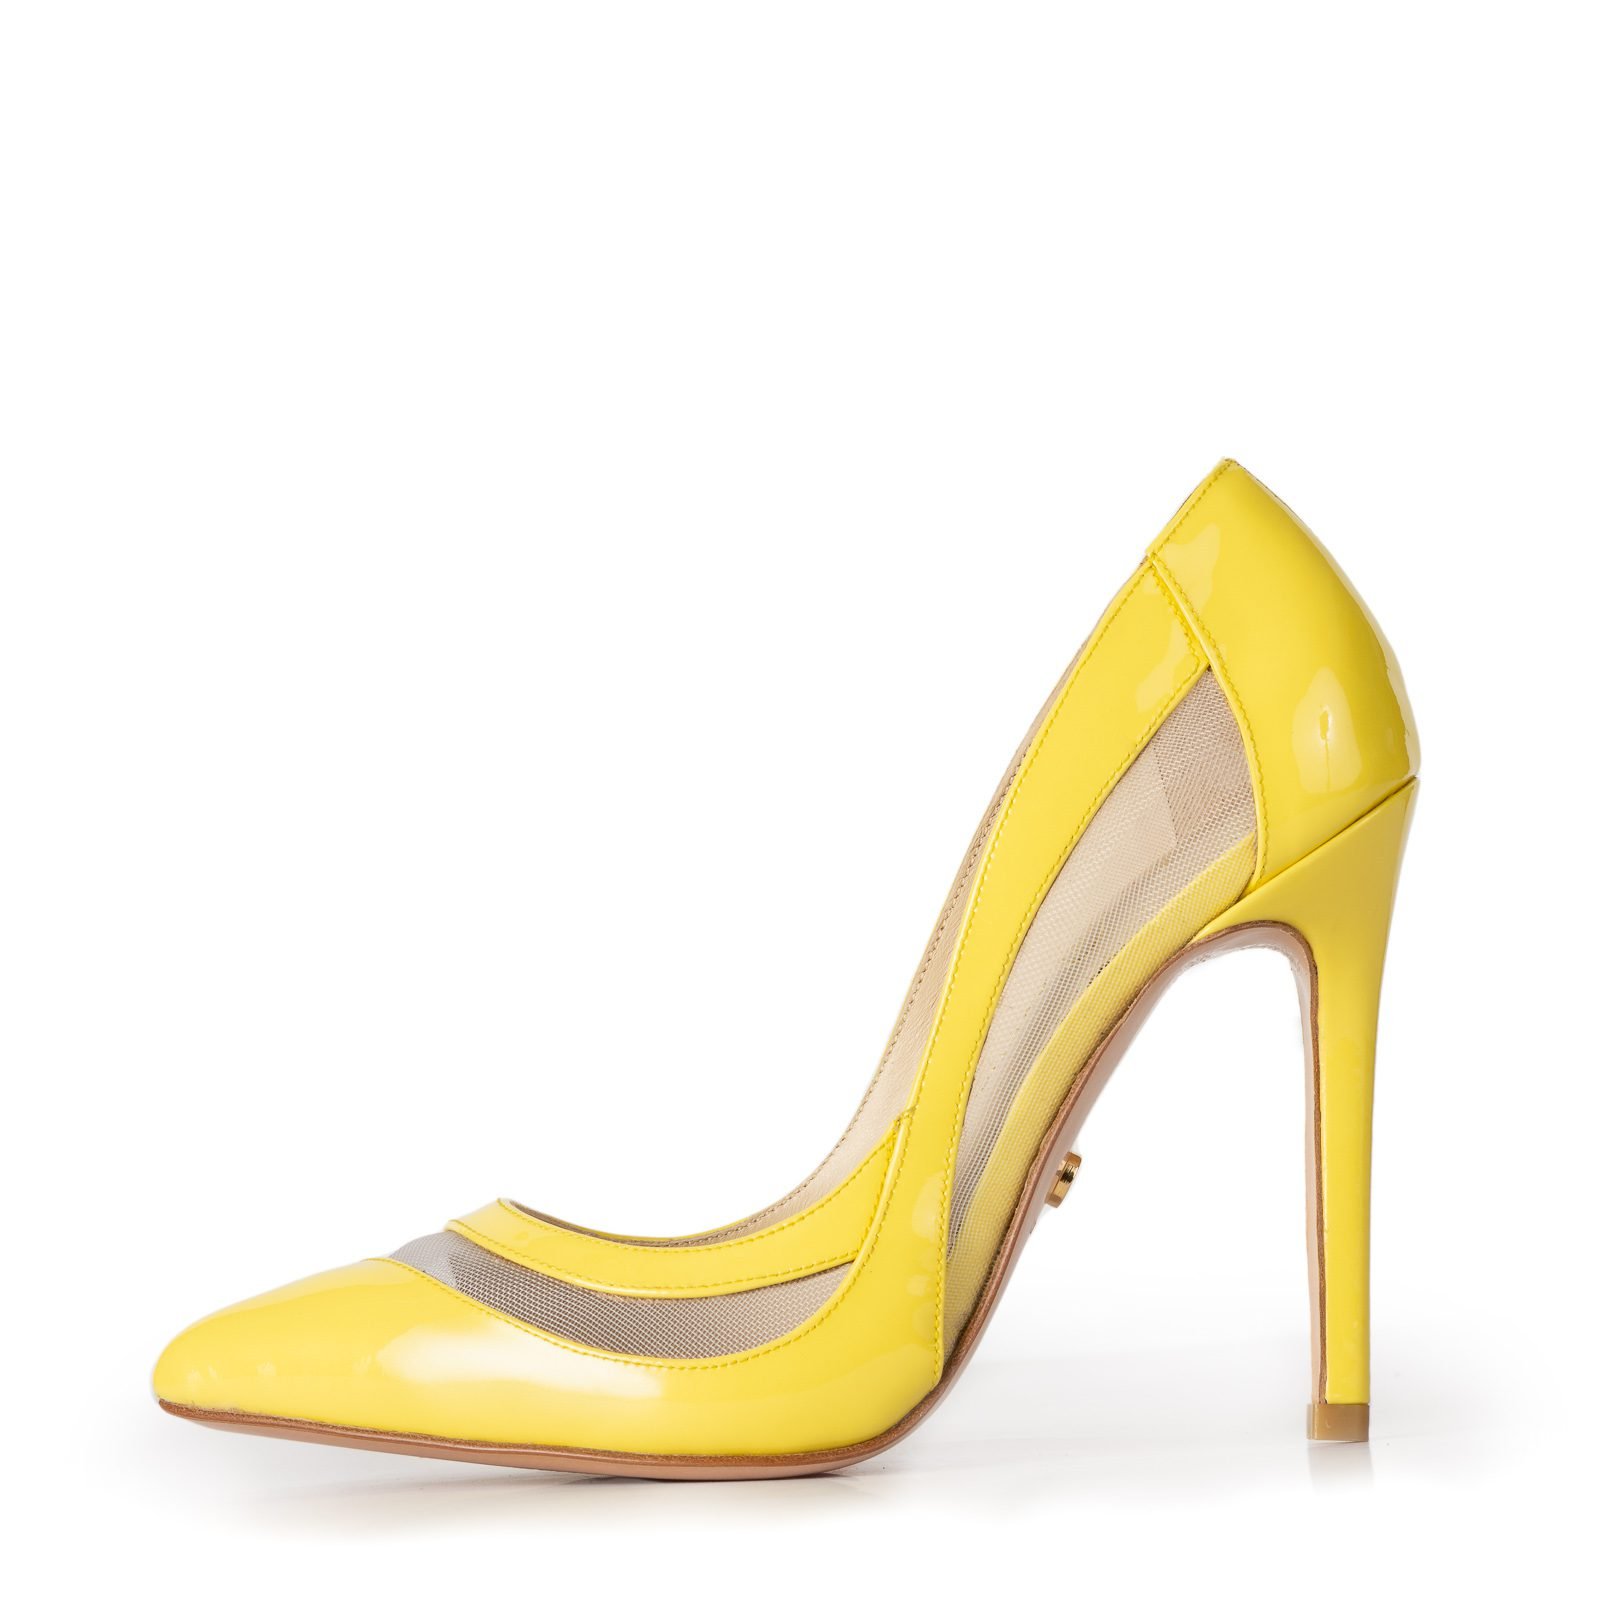 Side view of a yellow pump.